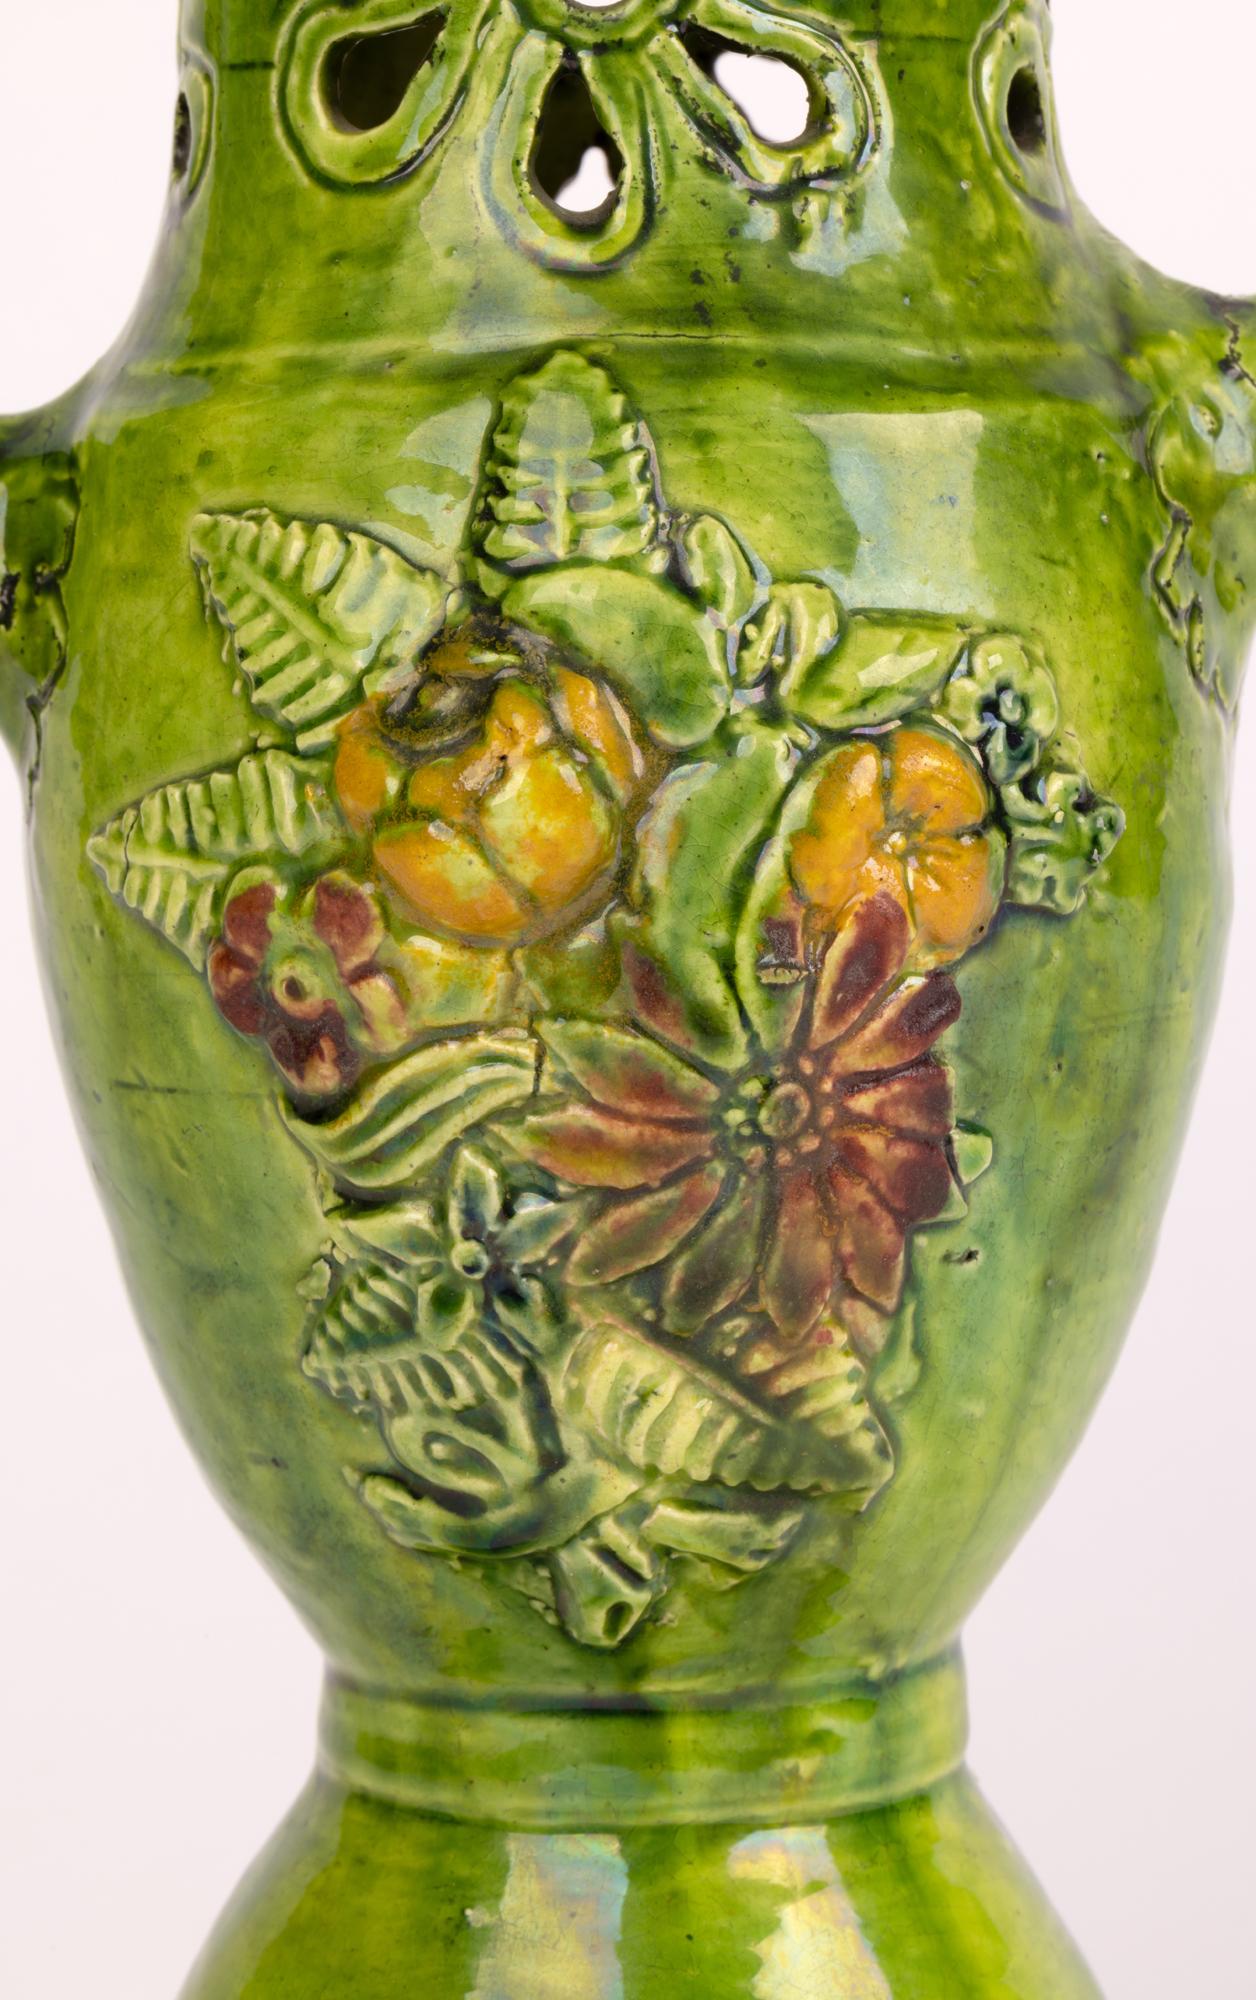 A rare and unusual castle Hedingham pottery twin handled puzzle vase or jug designed by Edward Bingham (British, 1829-1914) and dating between 1864 and 1901. Inspired by medieval and Tudor wares Bingham hand produced an assortment of wares, mostly